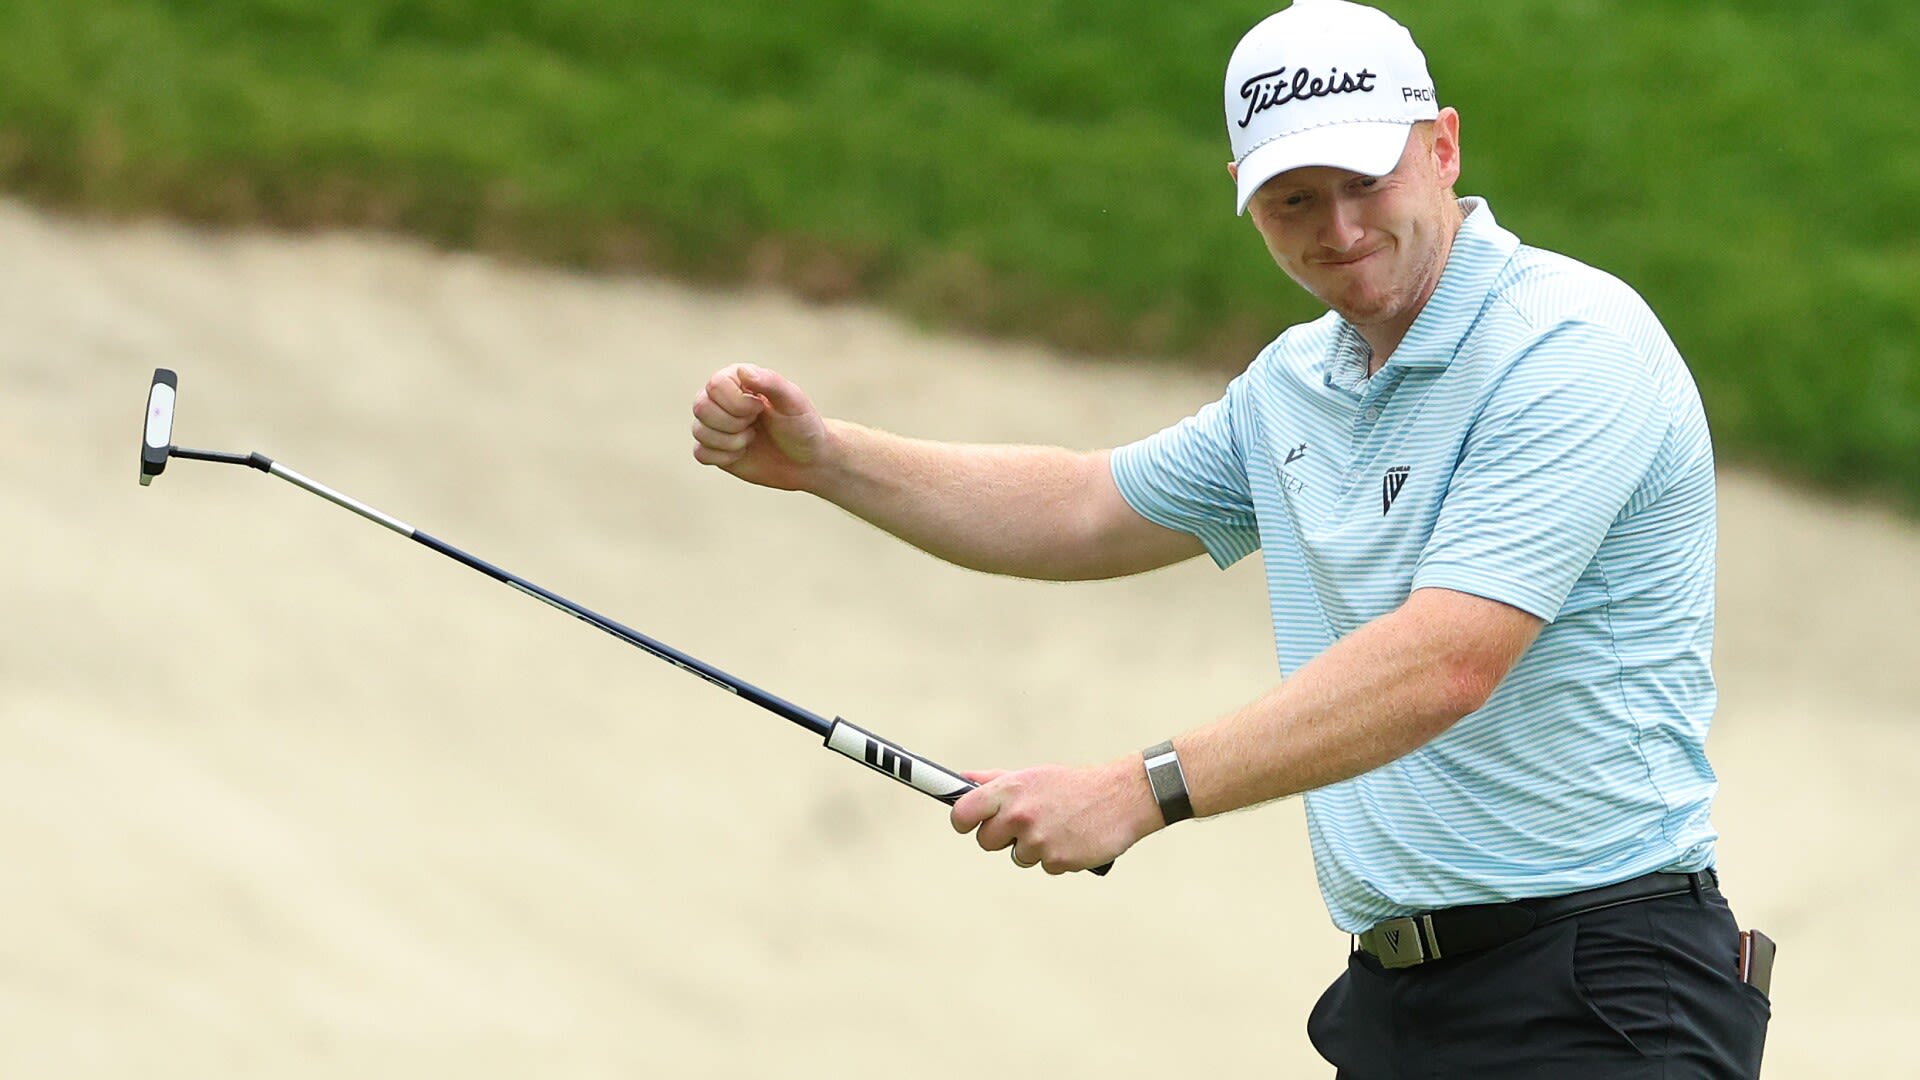 PGA Tour rookie Hayden Springer shoots 59 with dramatic finish in Rd. 1 of John Deere